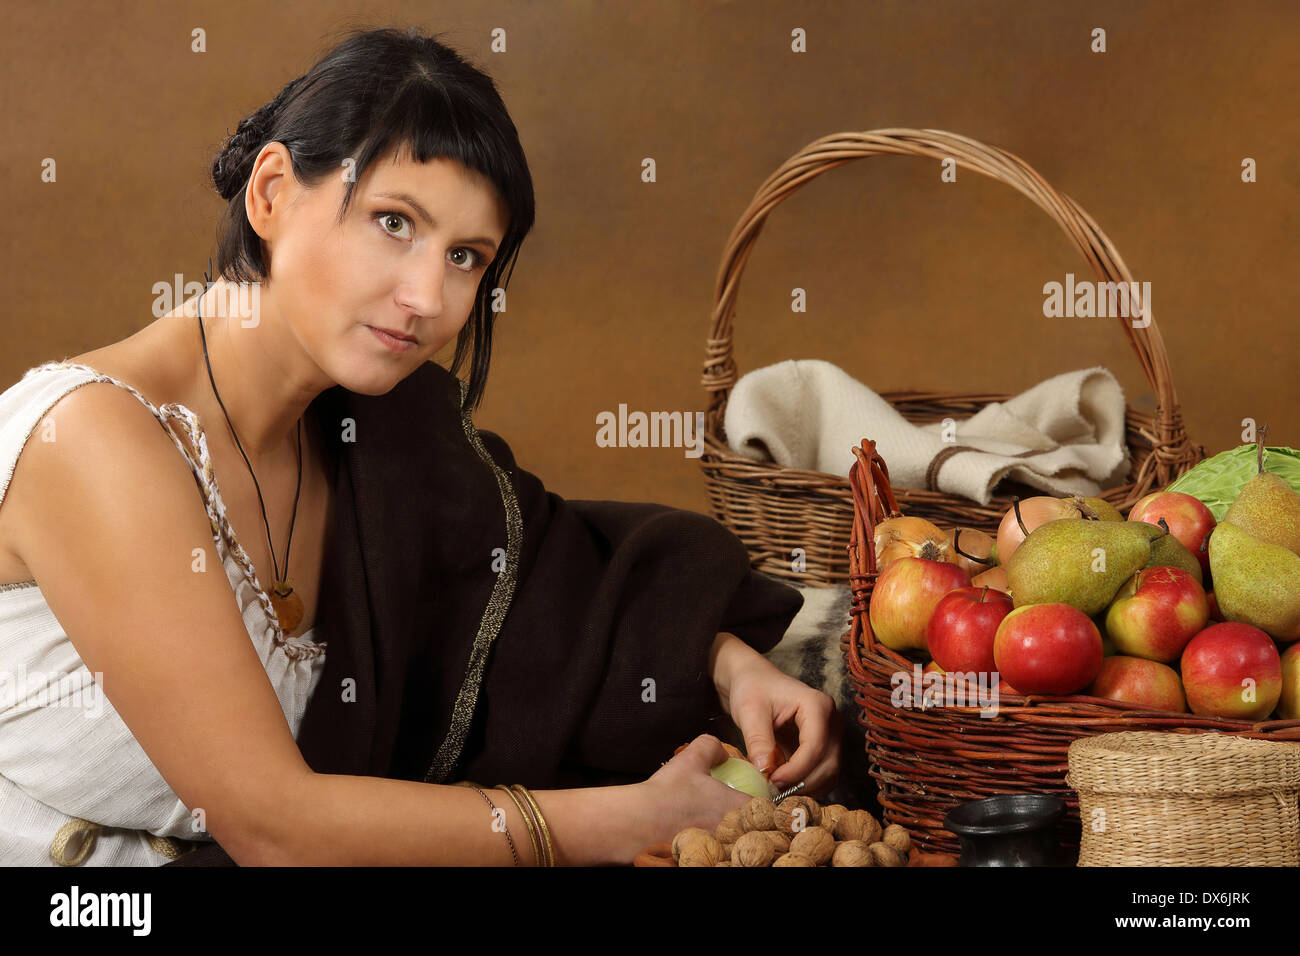 Young Romana peeling the onion with basket full of fruits and vegetables. Concept studio portrait on brown background. Stock Photo